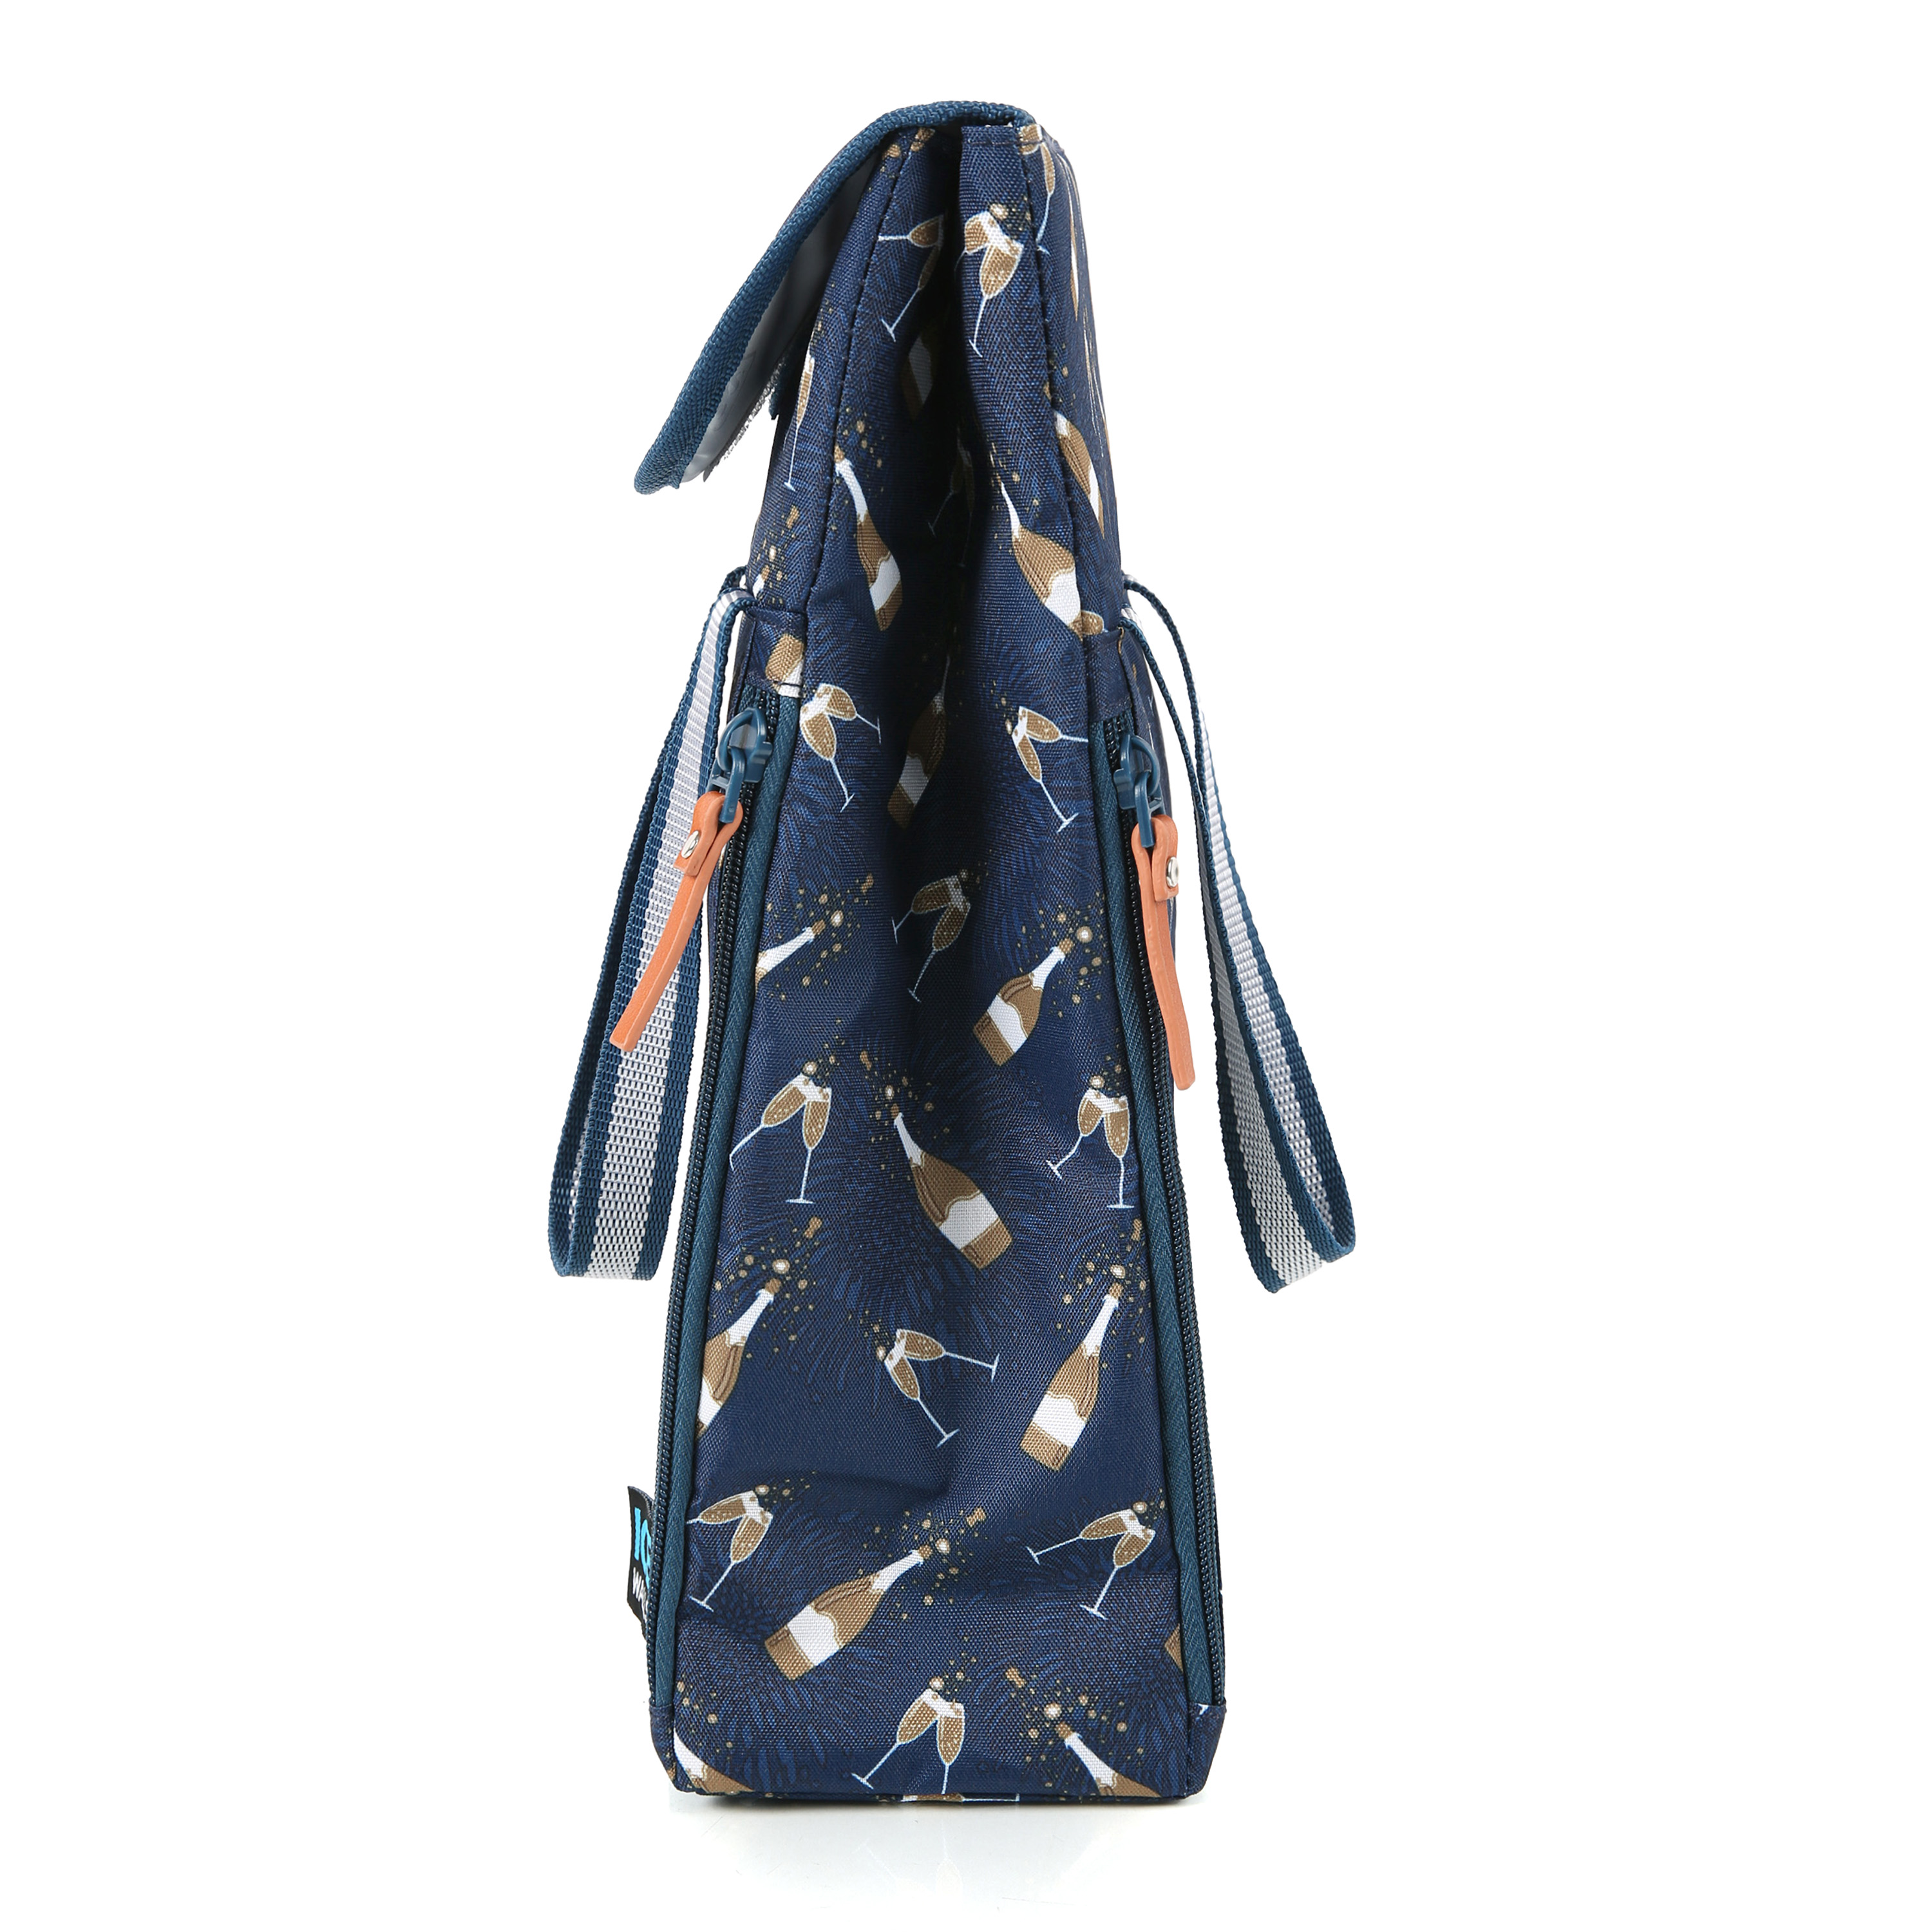 Arctic Zone Wine Tote Wine Bottle Bag, Navy Champagne - image 2 of 8